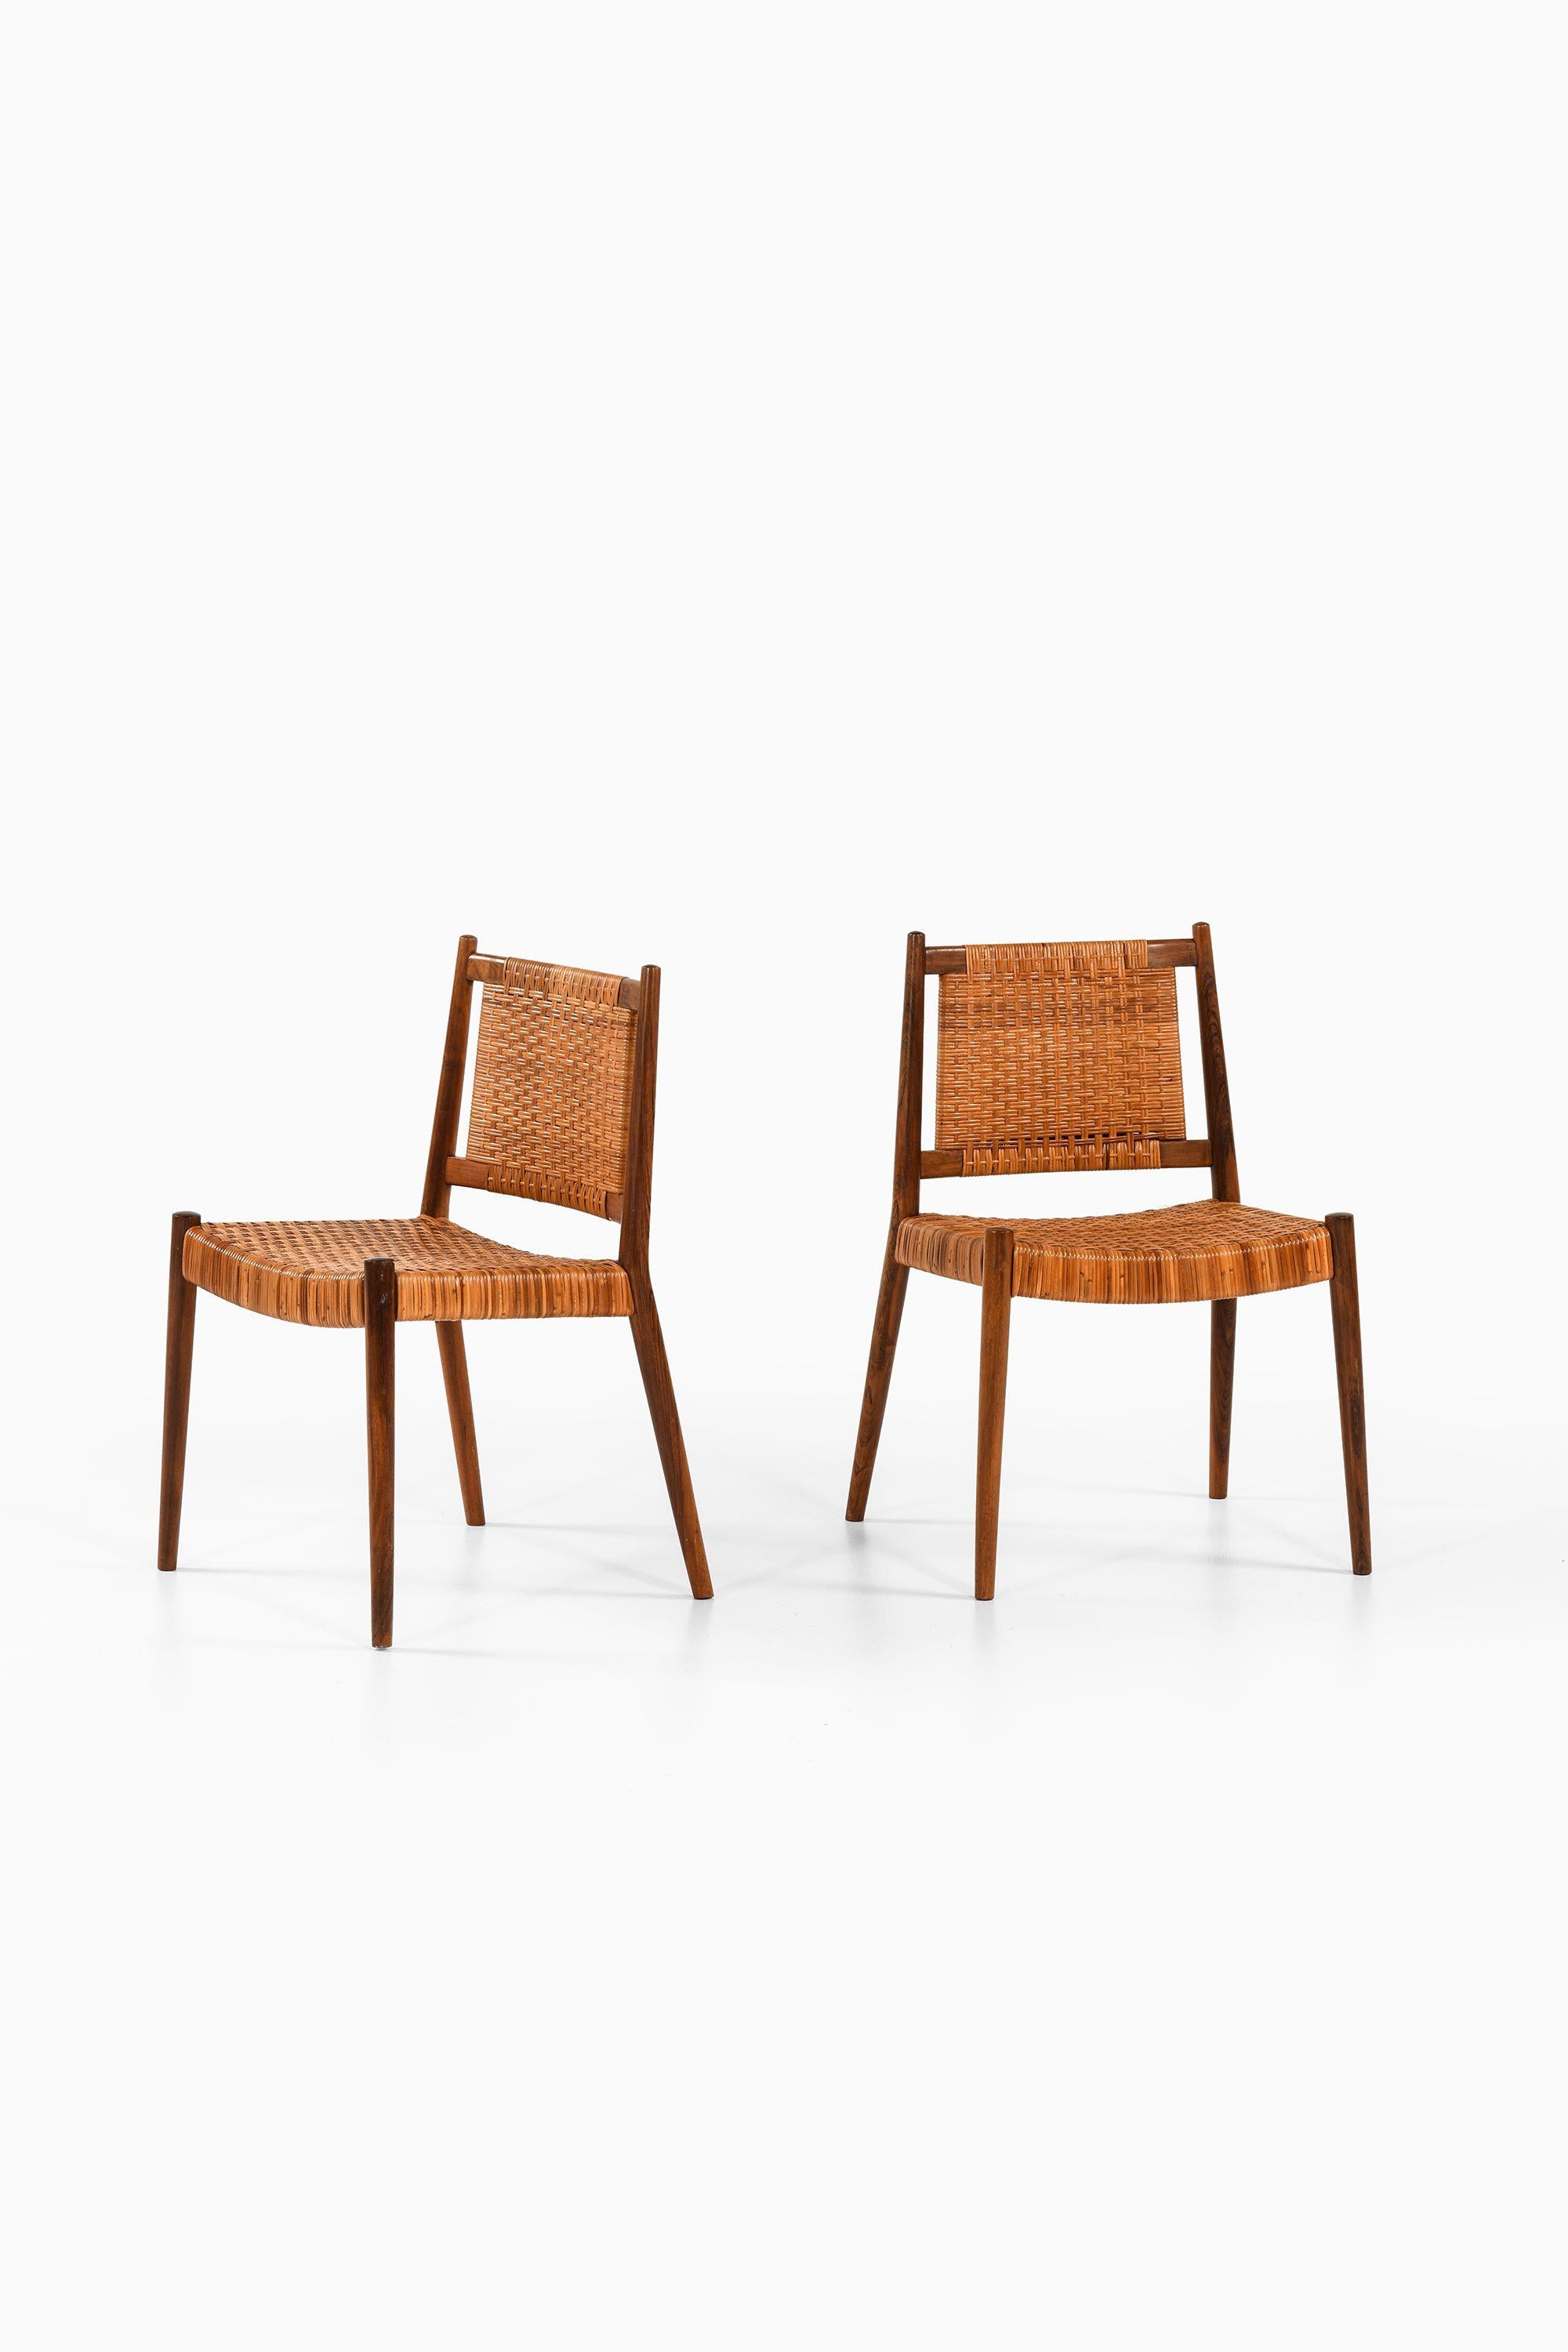 Danish Set of 8 Dining Chairs in Rosewood and Woven Cane by Steffan Syrach-Larsen, 1960 For Sale